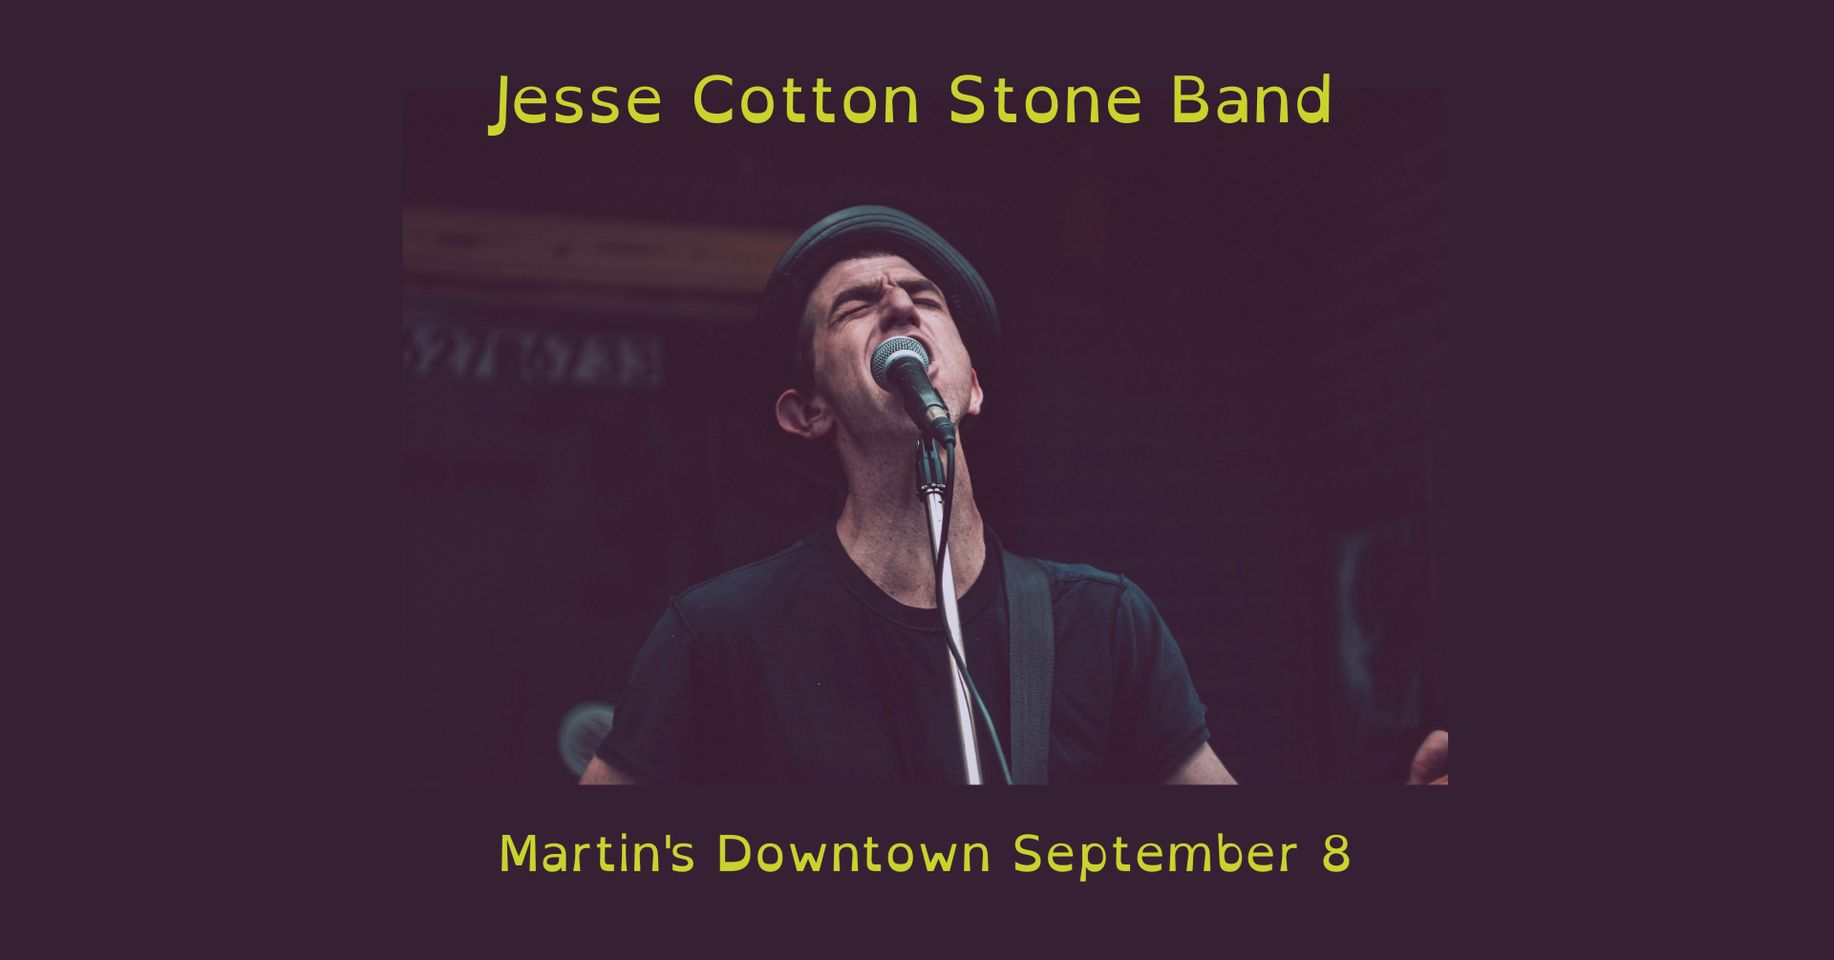 Jesse Cotton Stone Band Live at Martin’s Downtown